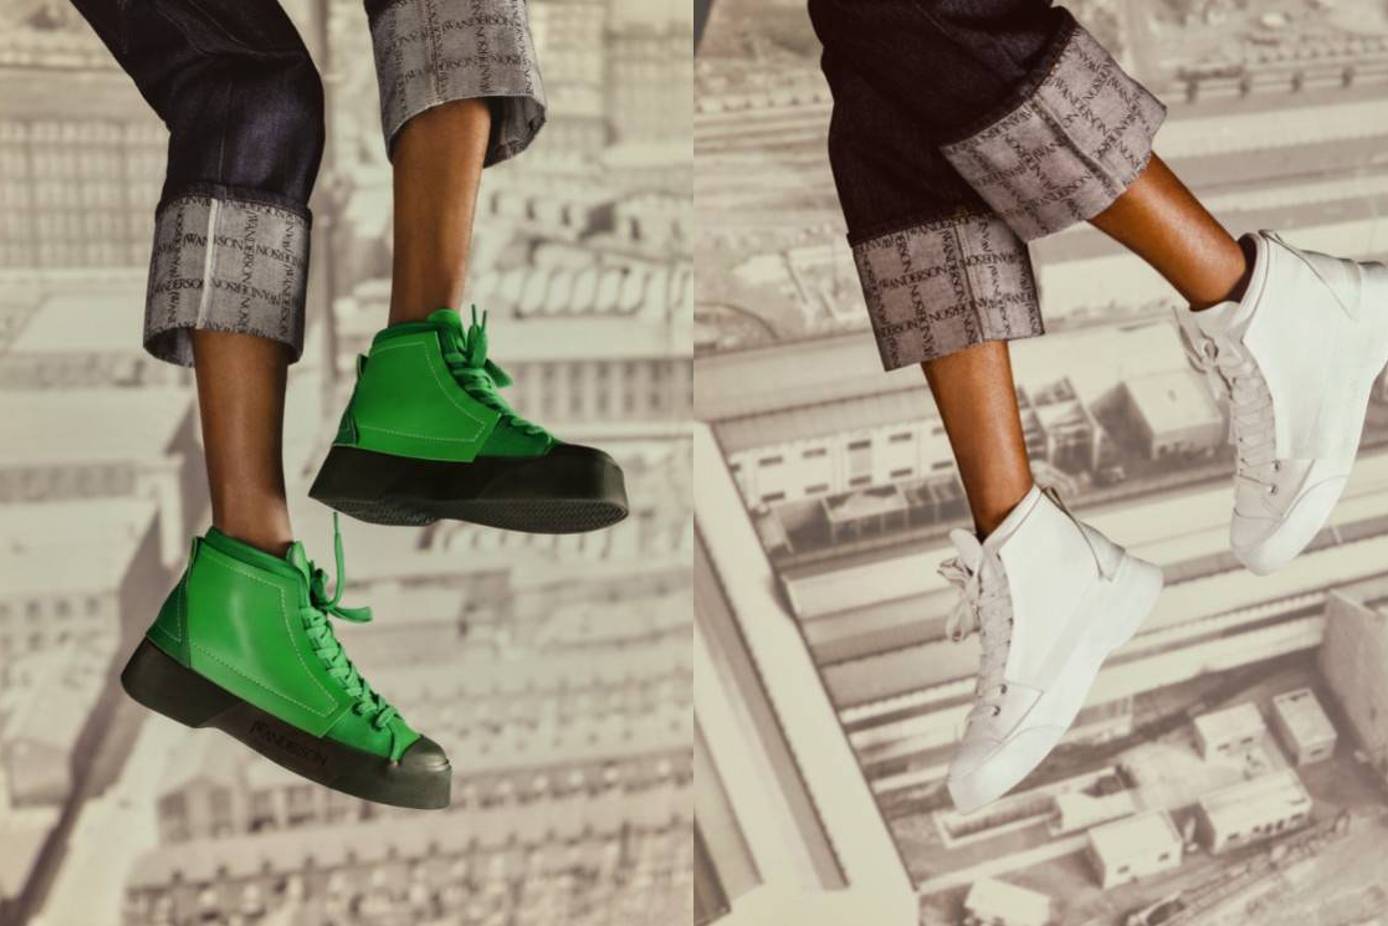 Deckers Brands has launched Ahnu, its new sneaker brand designed